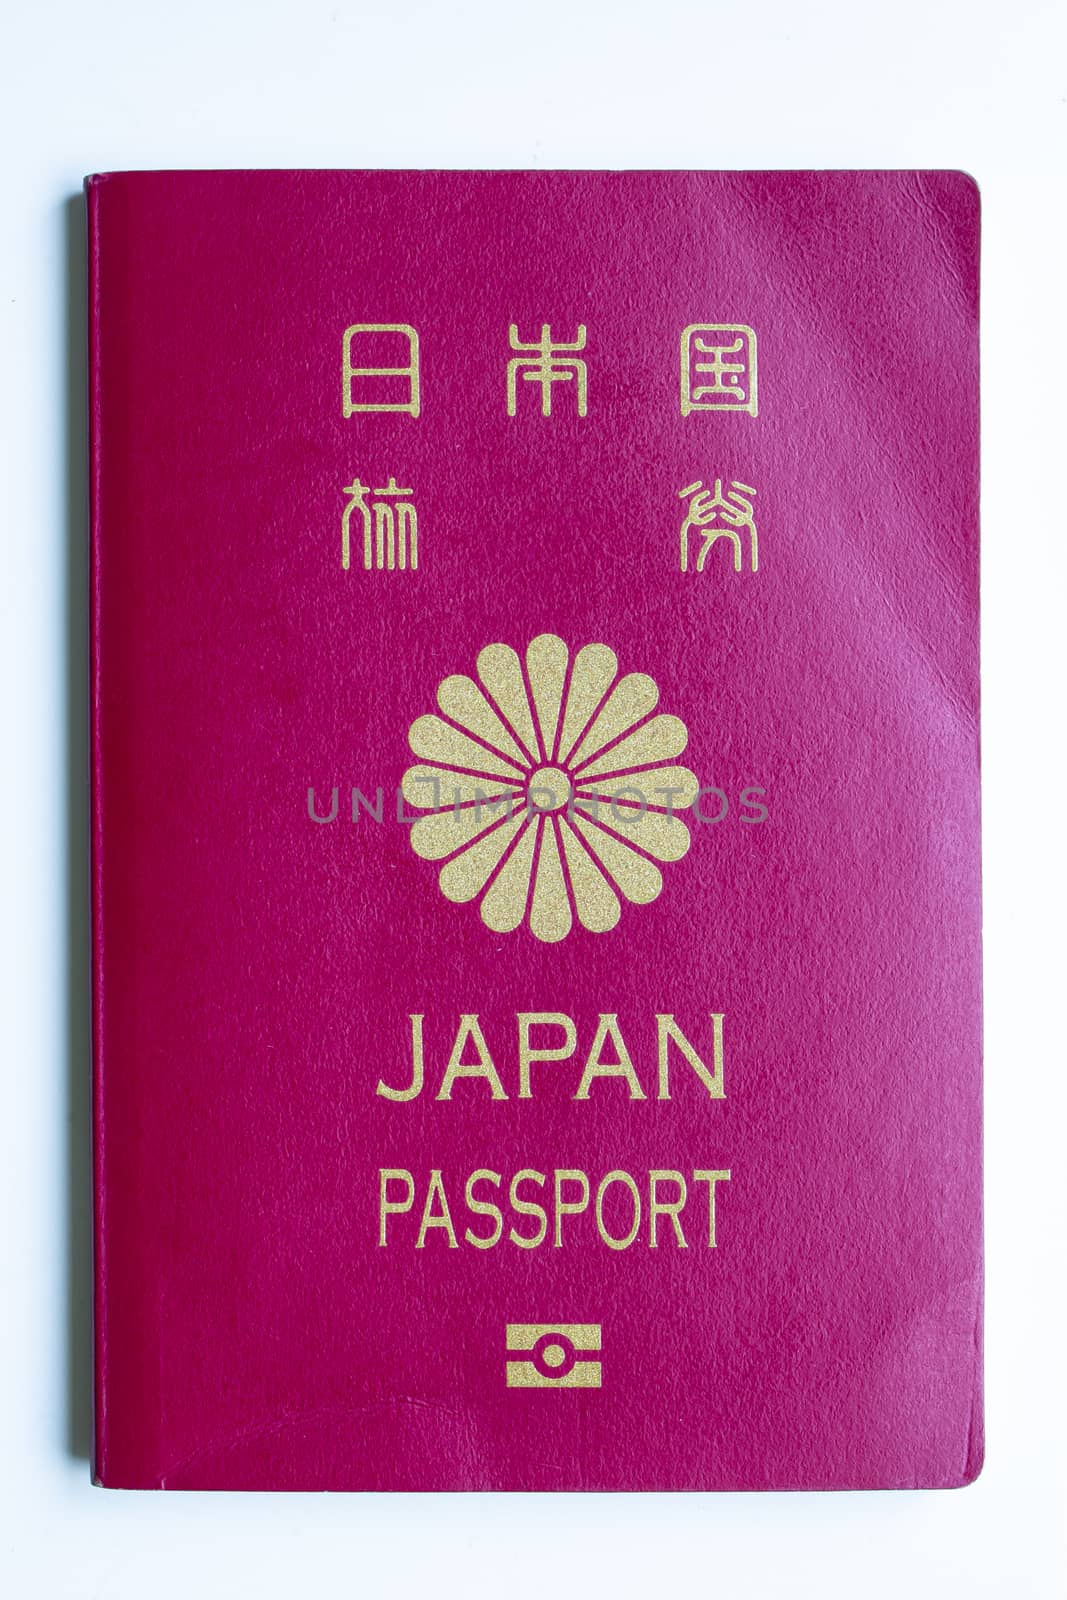 Japanese passport front cover on a white background